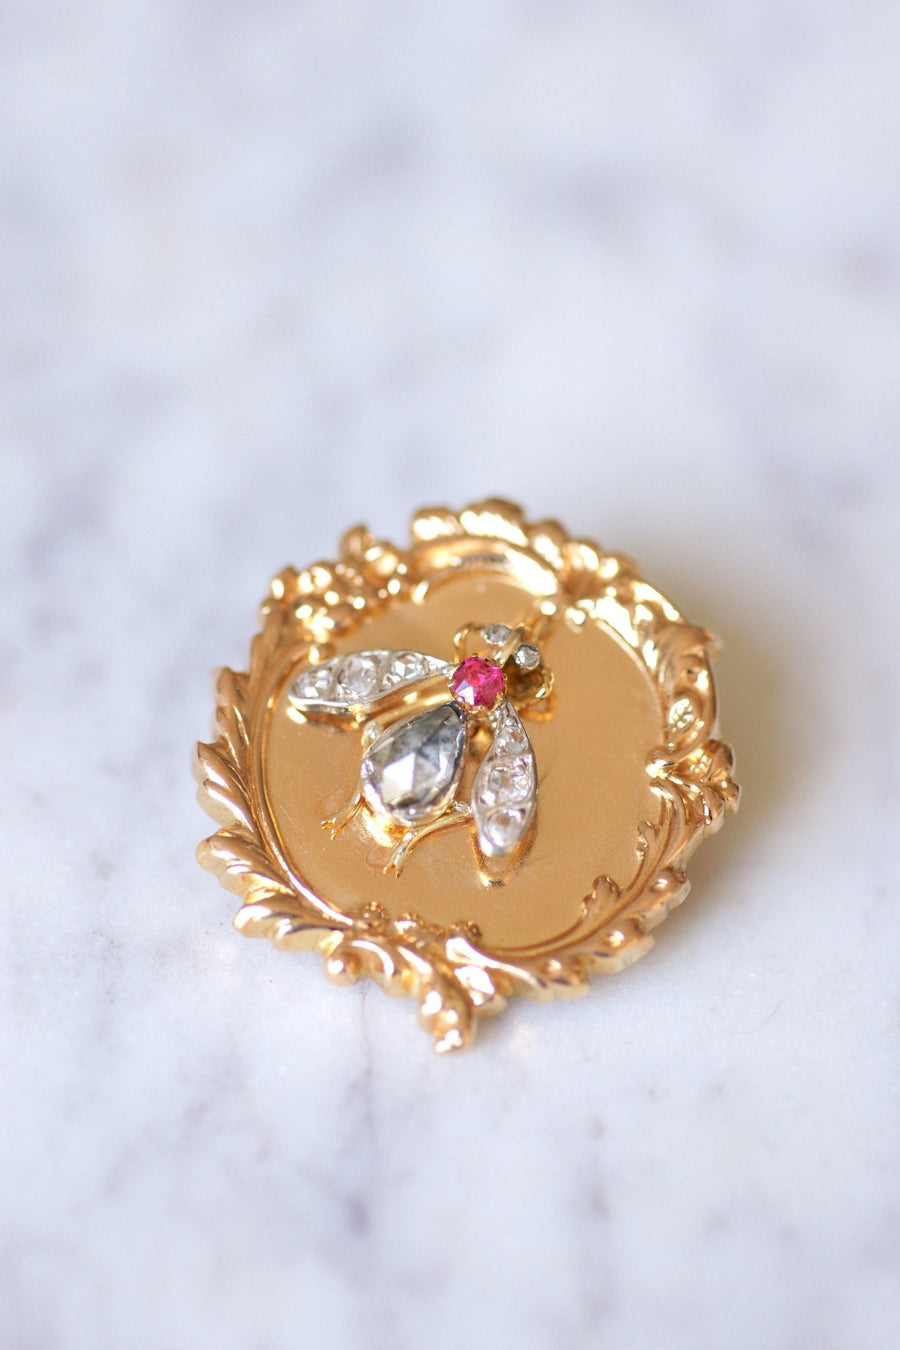 Antique Victorian brooch in gold and diamond fly - Galerie Pénélope